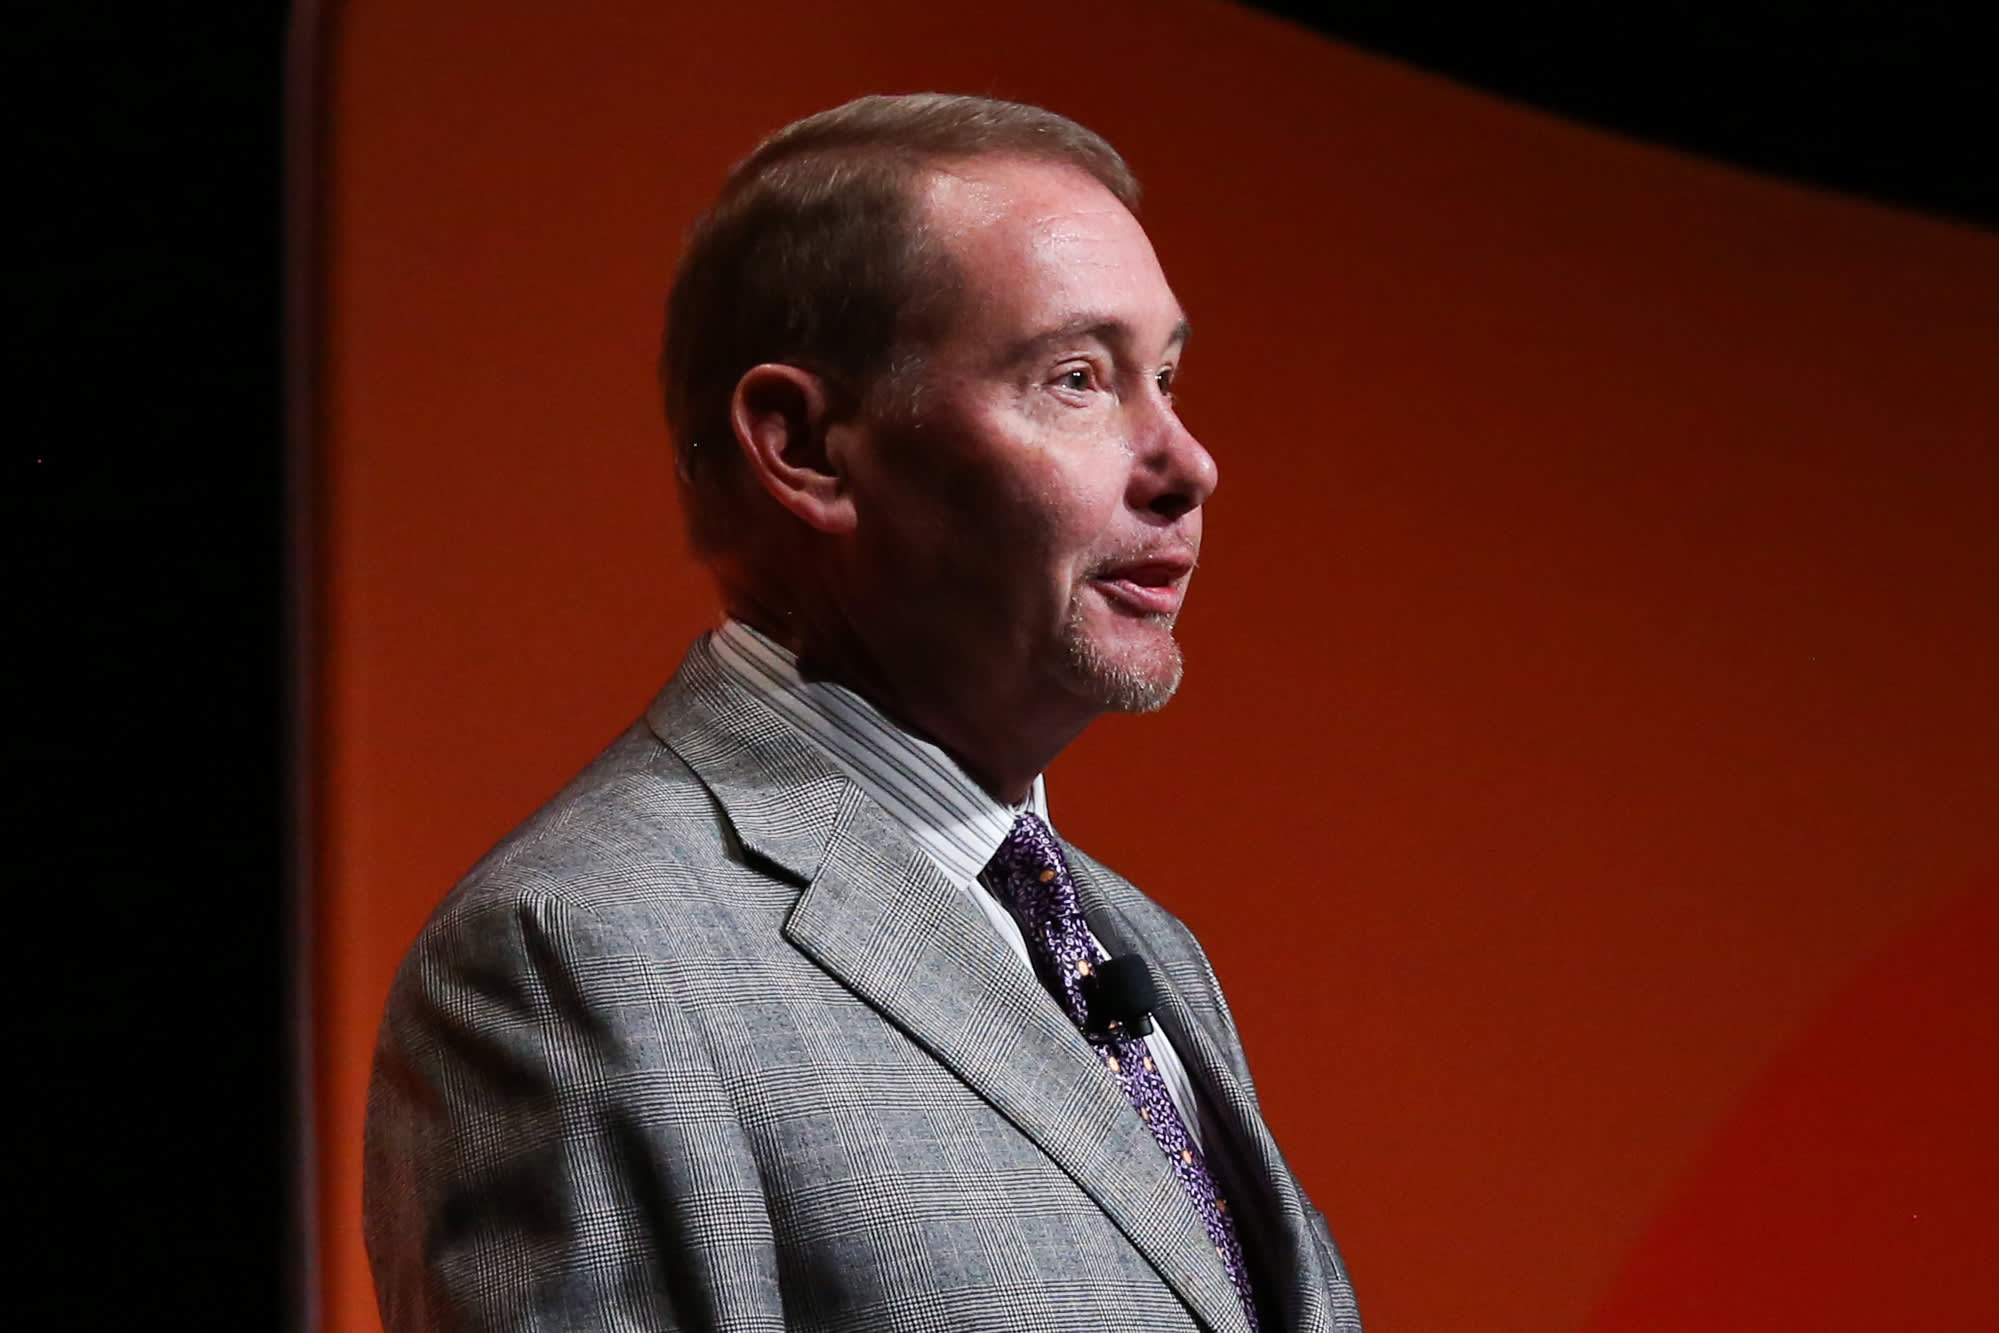 Bond king Jeffrey Gundlach calls fixed income the most attractive he's seen in 10 years